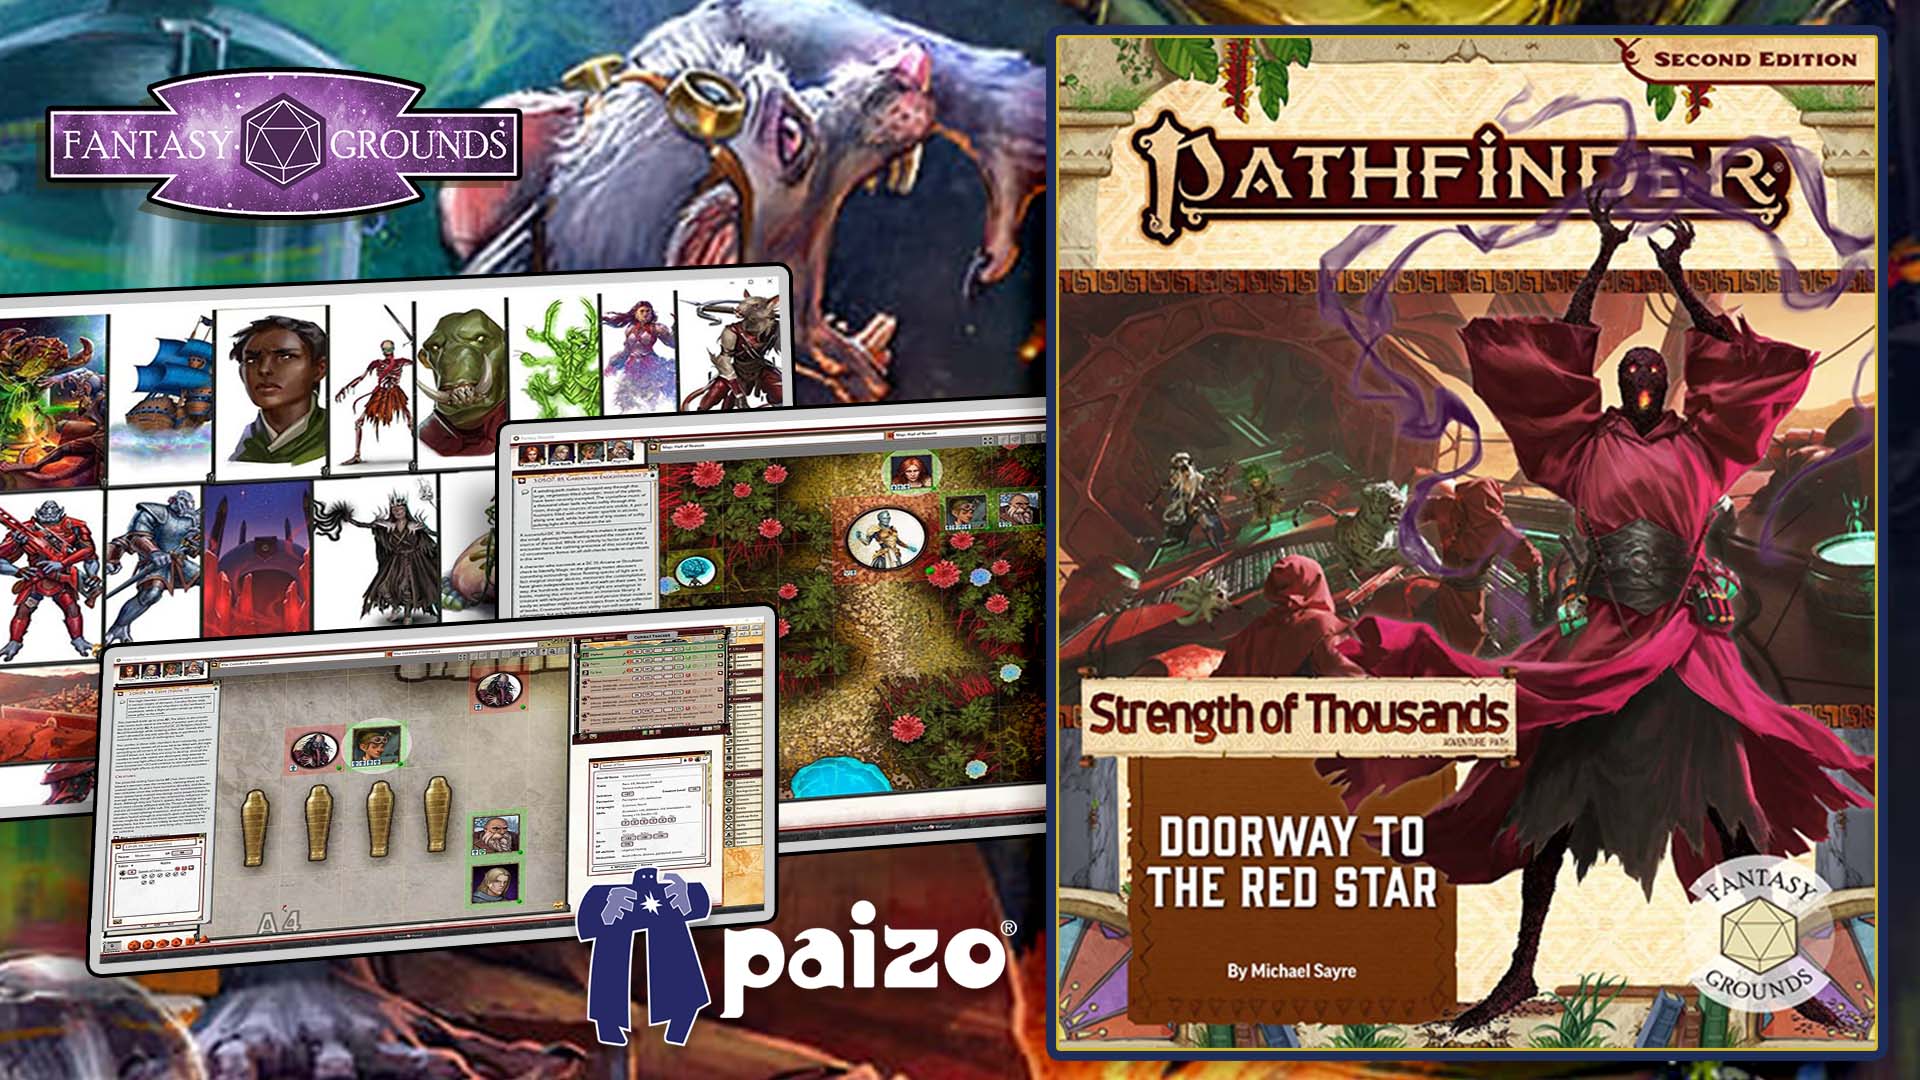 Pathfinder 2 RPG - Strength of Thousands AP 5 Doorway to the Red Star(PZOSMWPZO90173FG).jpg